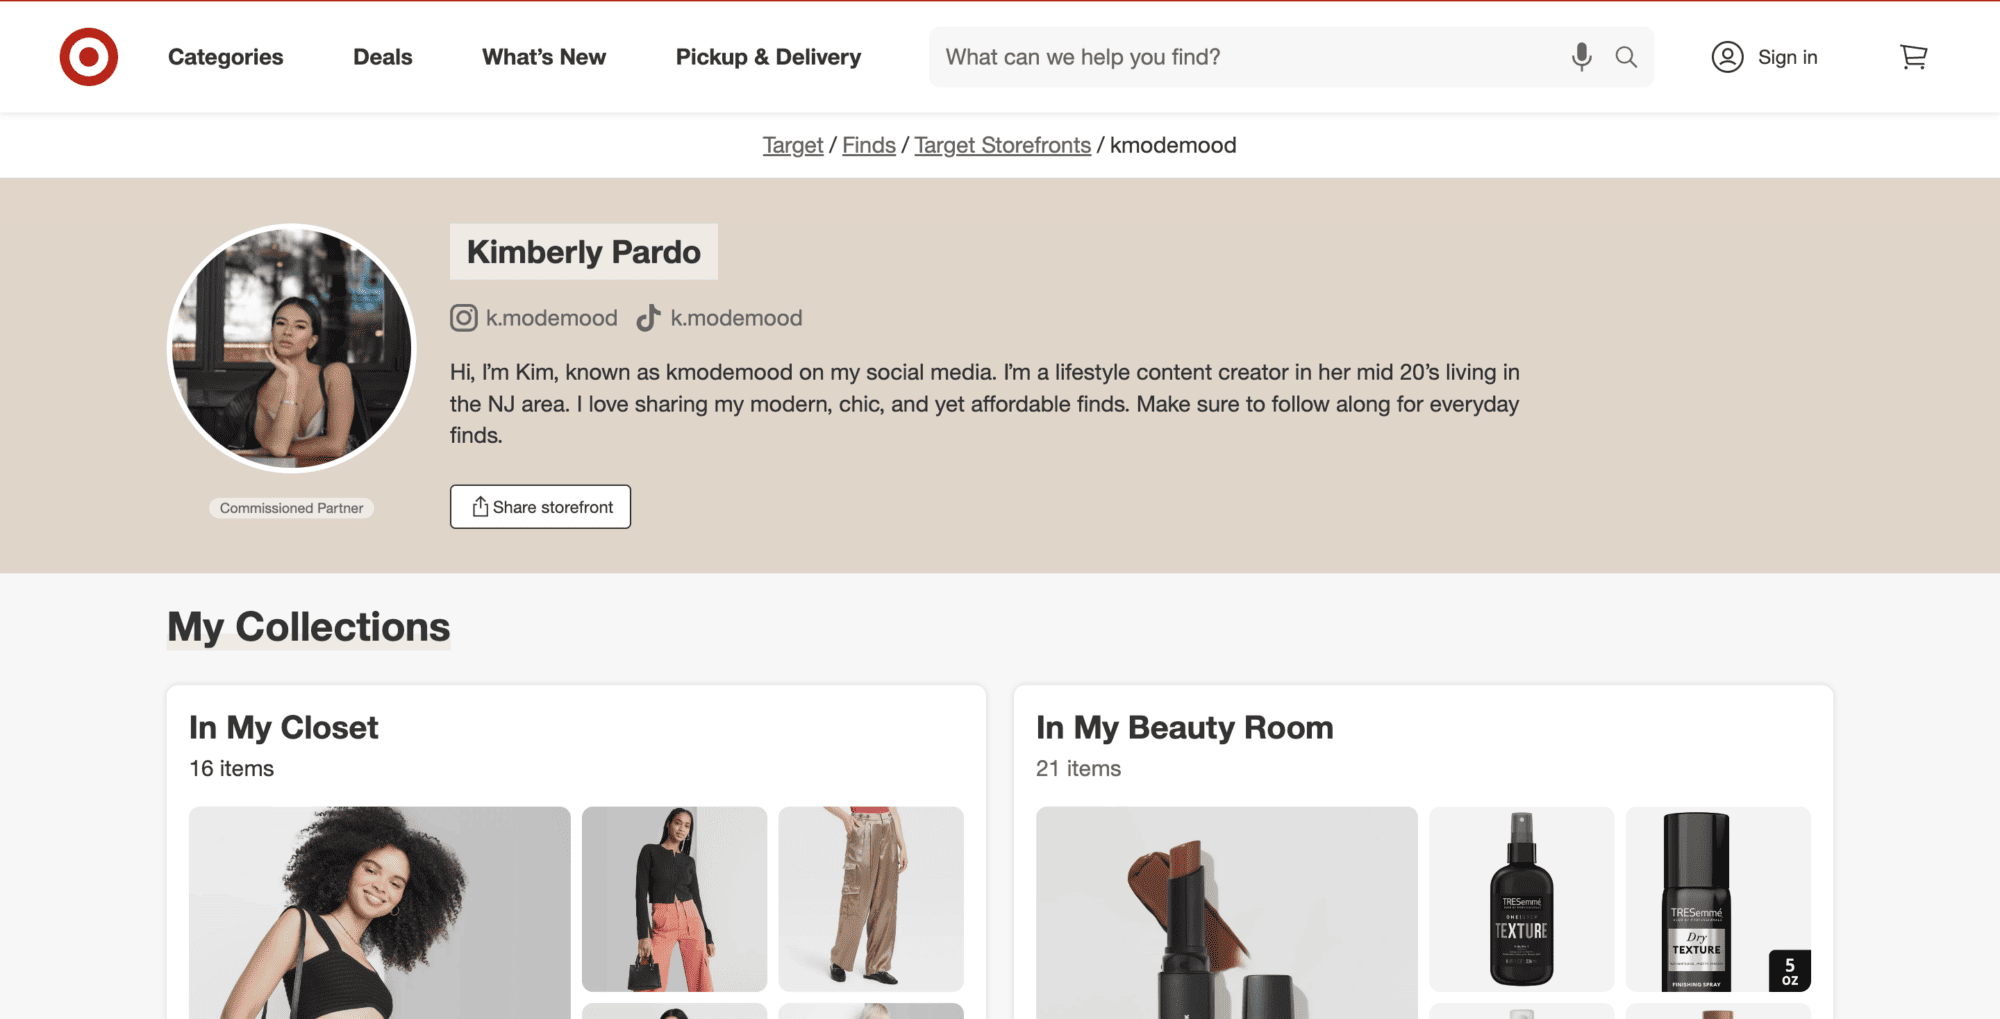 Kimberly Pardo's Target Storefront that includes her profile image, collections, and biography